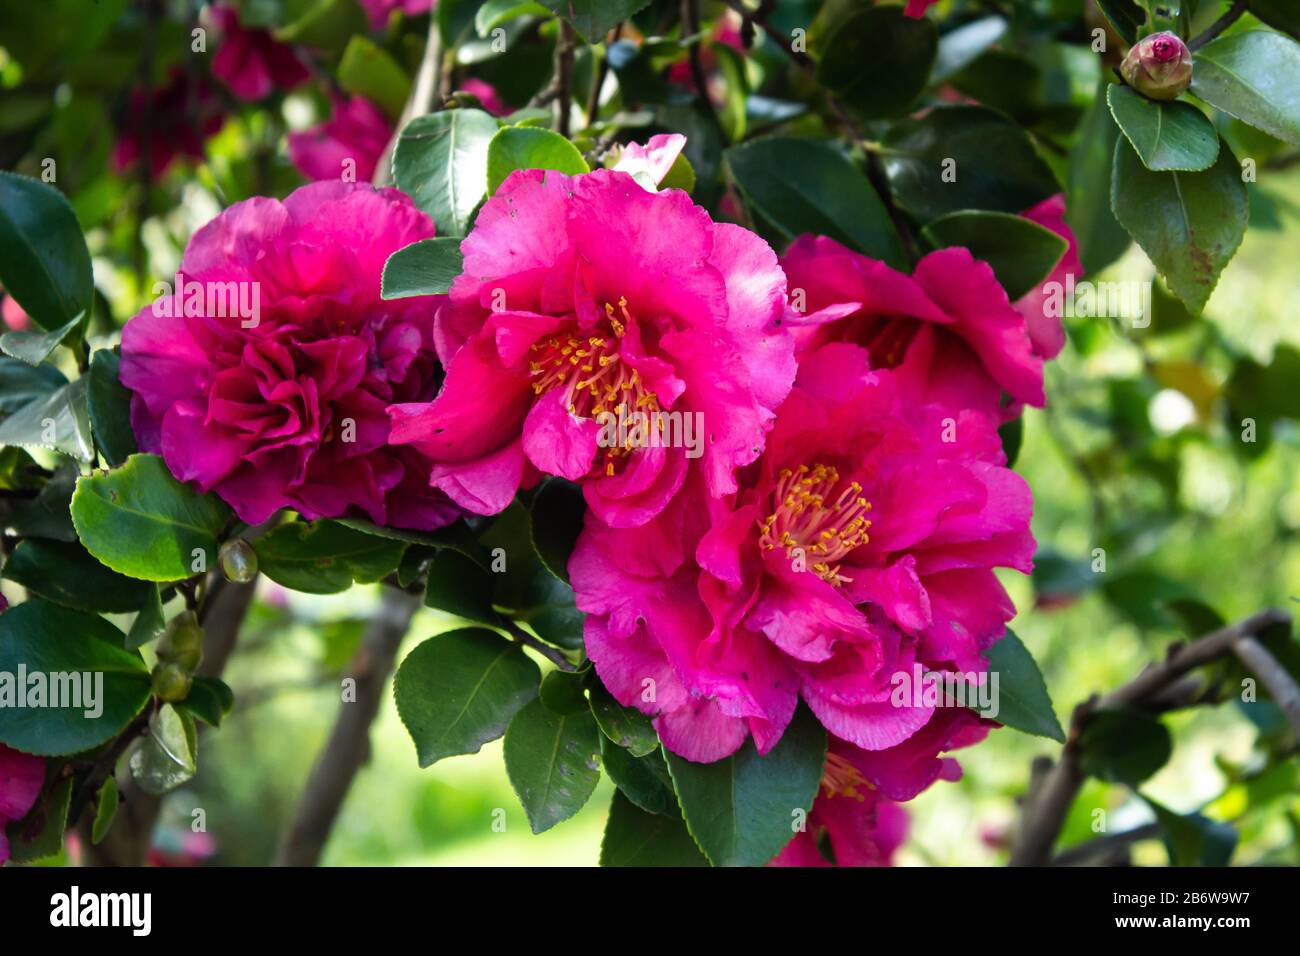 Pink Camelia flower blossoms on tree against green foliage Stock Photo